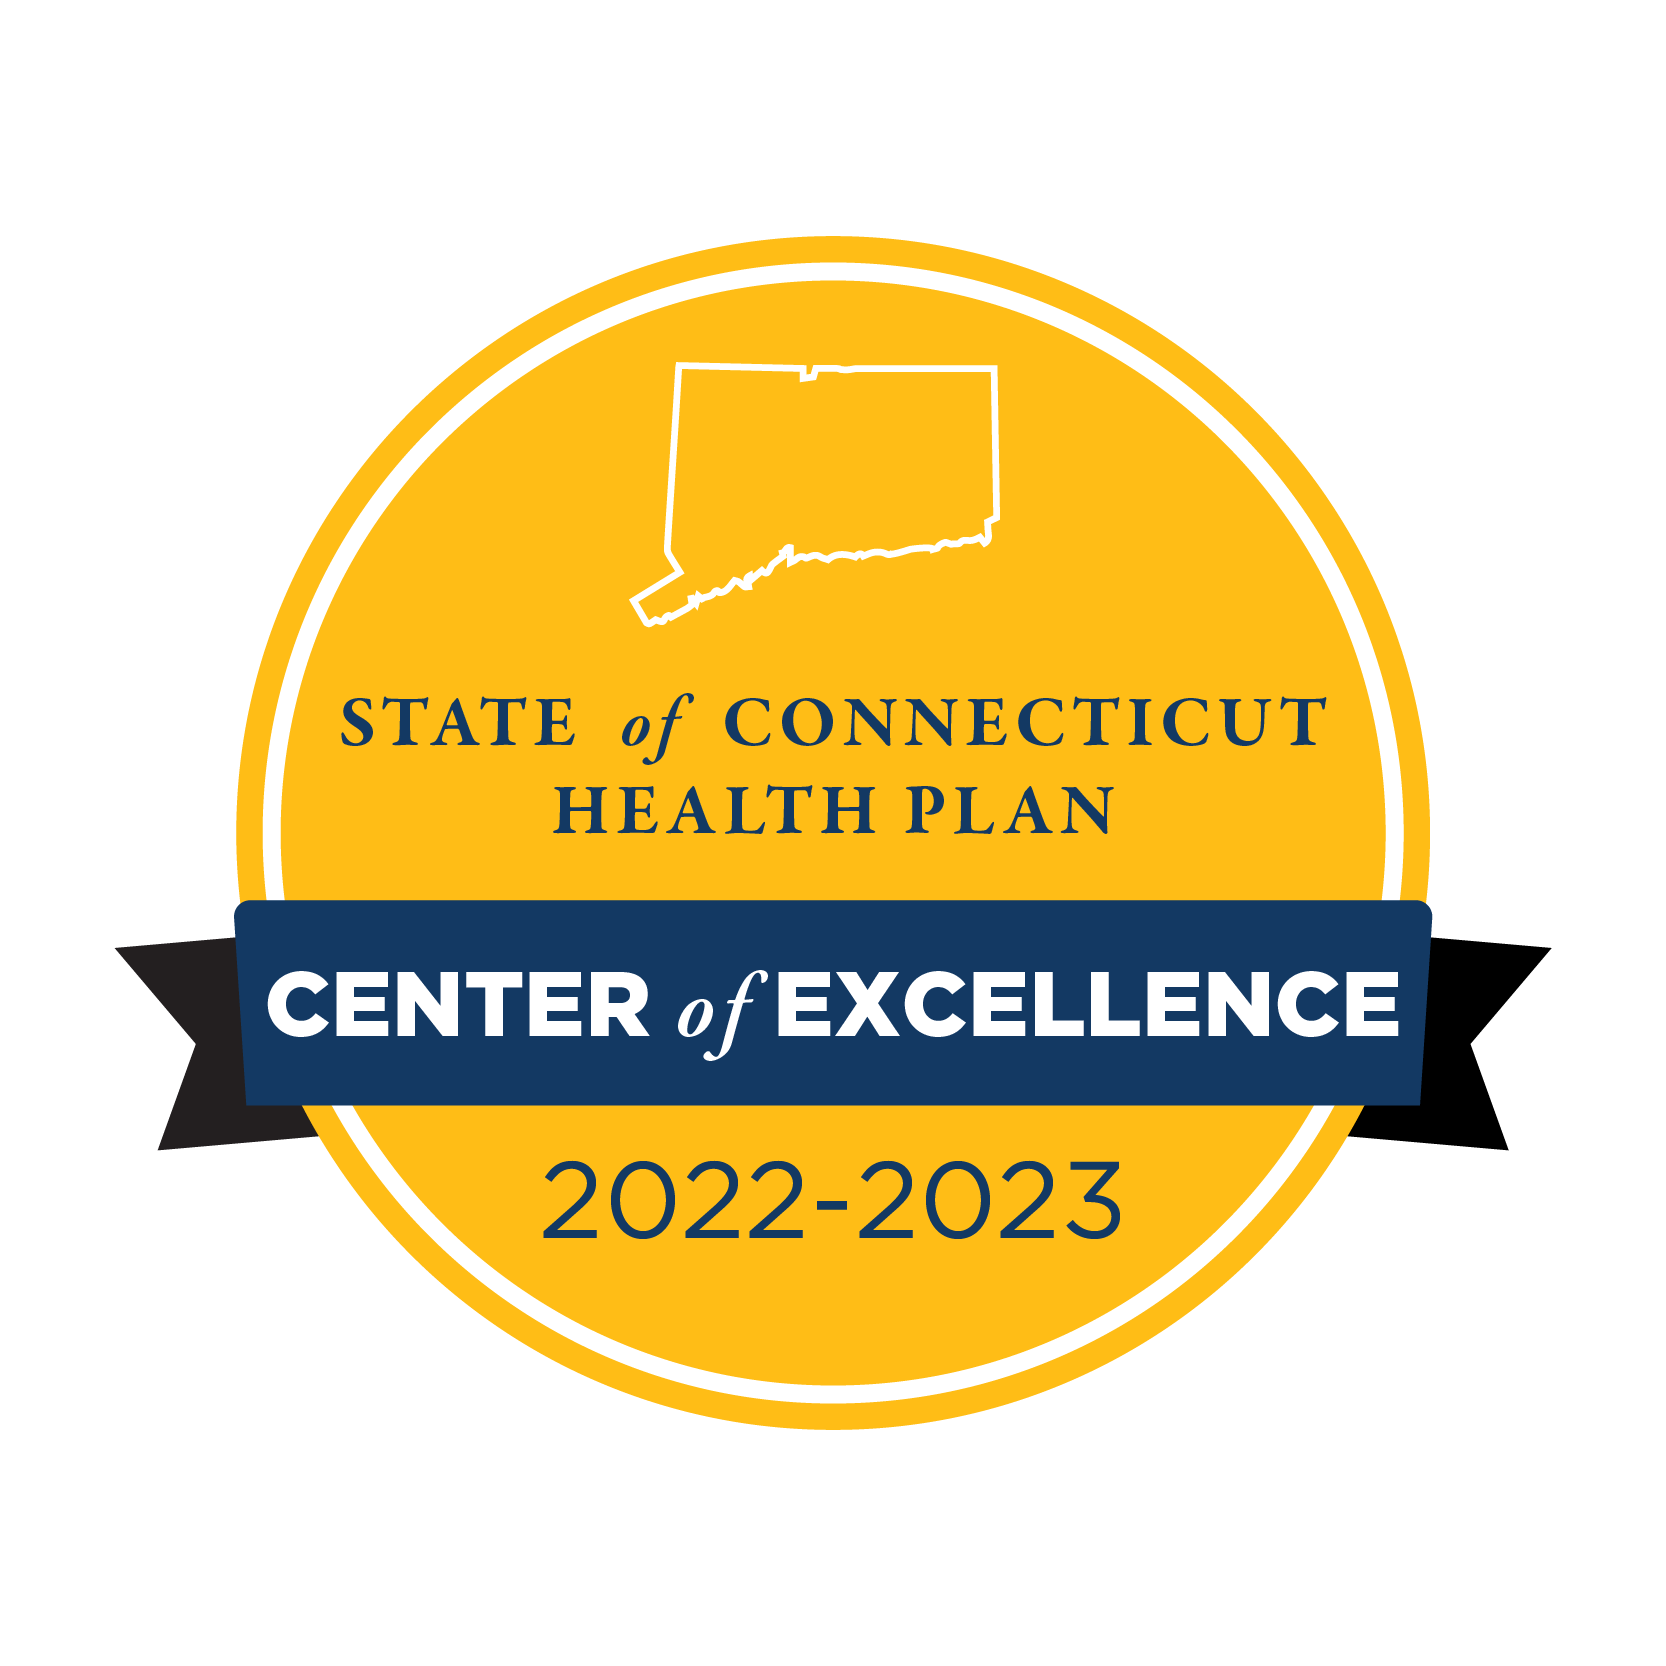 State of Connecticut Health Plan Center of Excellence badge